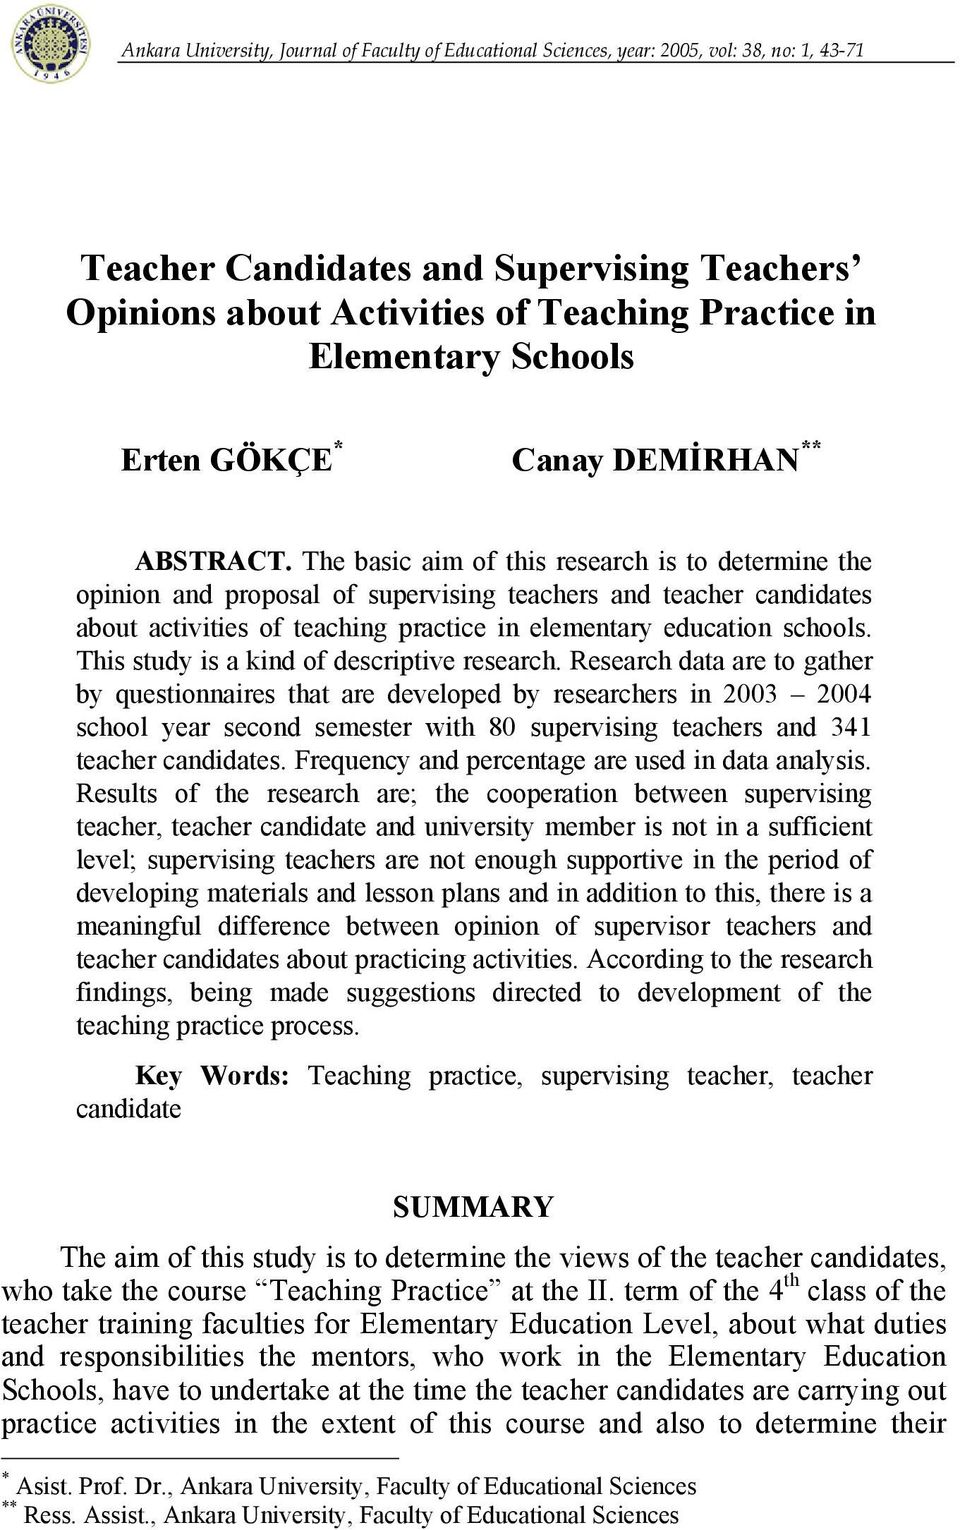 The basic aim of this research is to determine the opinion and proposal of supervising teachers and teacher candidates about activities of teaching practice in elementary education schools.